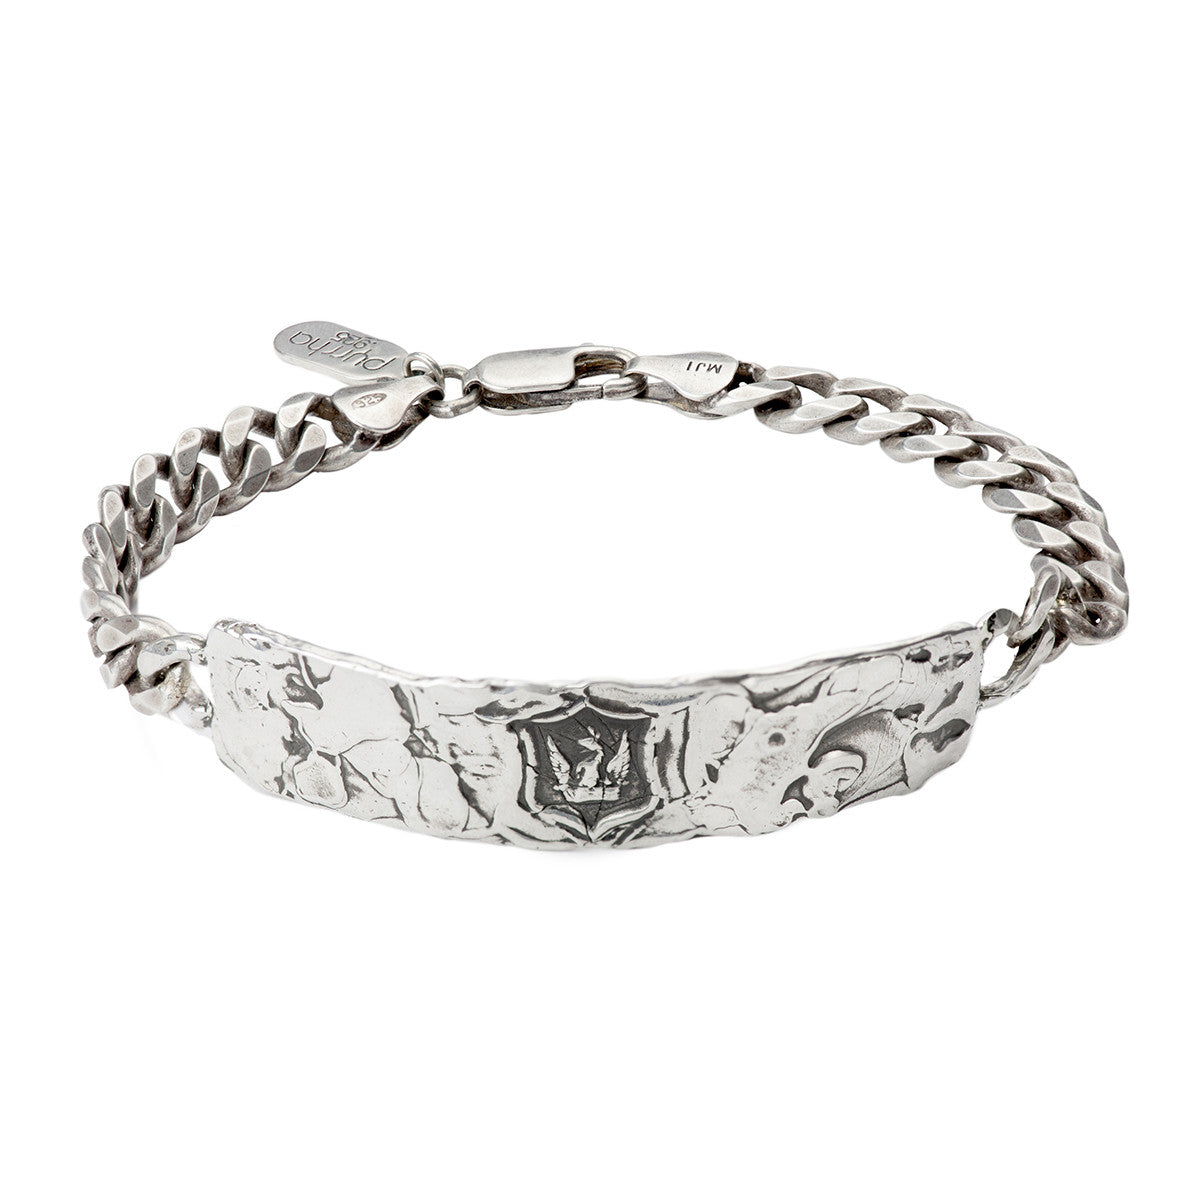 A silver chain bracelet with a hard sterling silver band featuring a Bravery and Protection talisman.